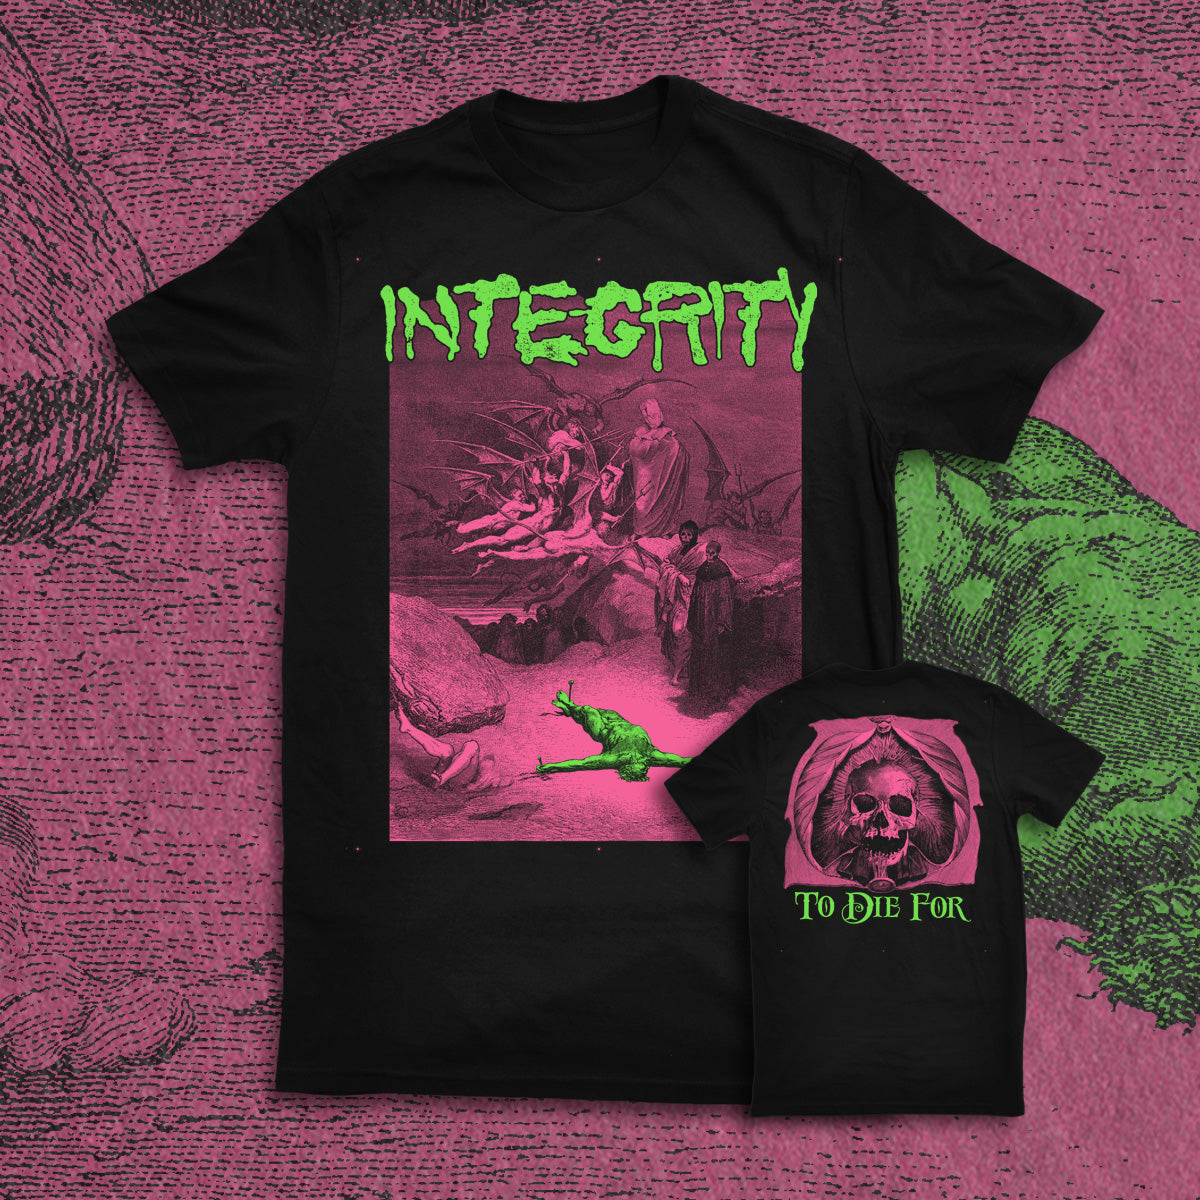 INTEGRITY "TO DIE FOR" BRIGHT SHIRT (PRE-ORDER)